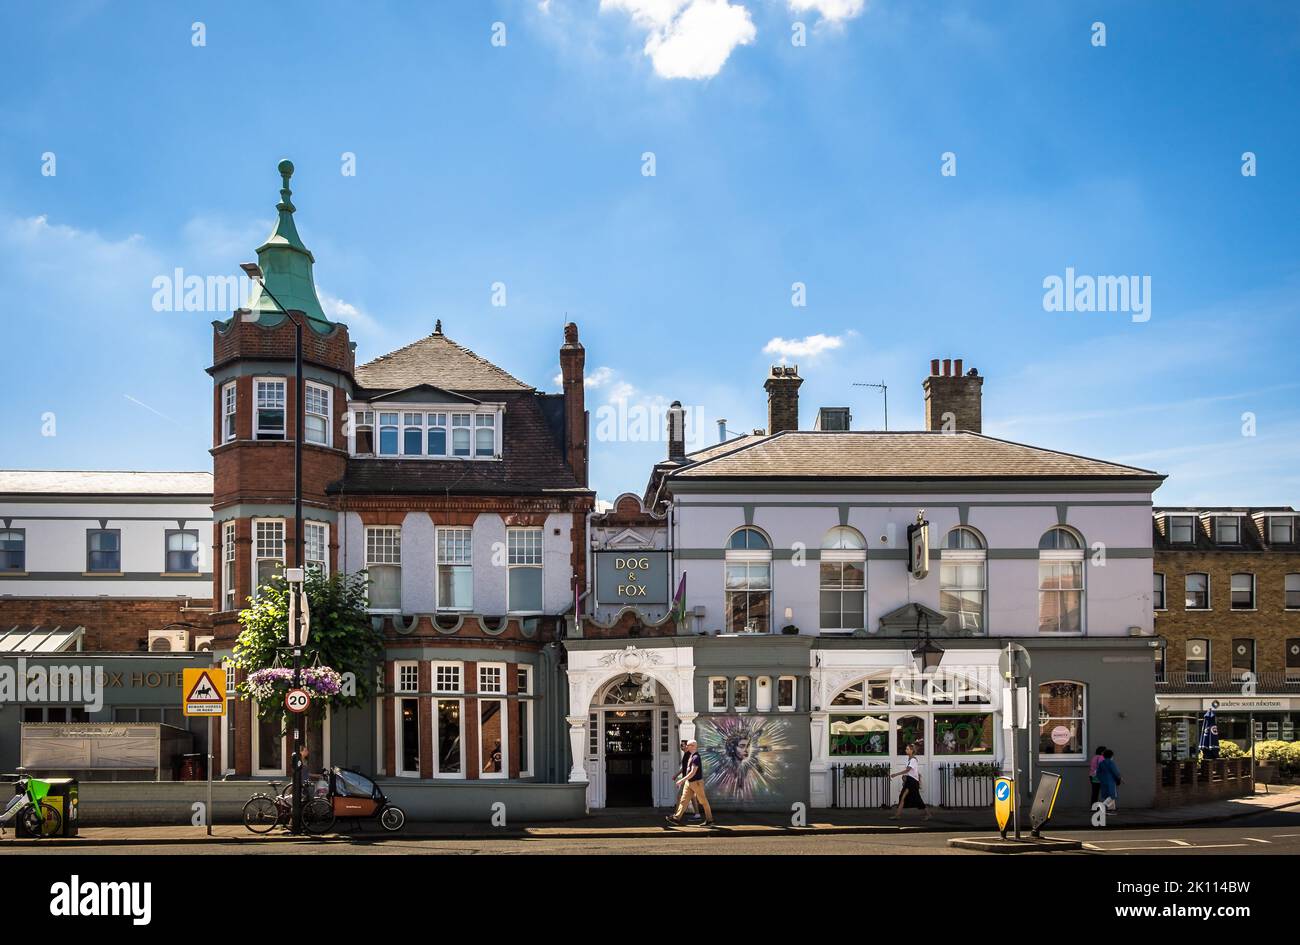 London, UK, July 2022, view of the Dog and Fox, a pub and hotel in Wimbledon Village high street Stock Photo